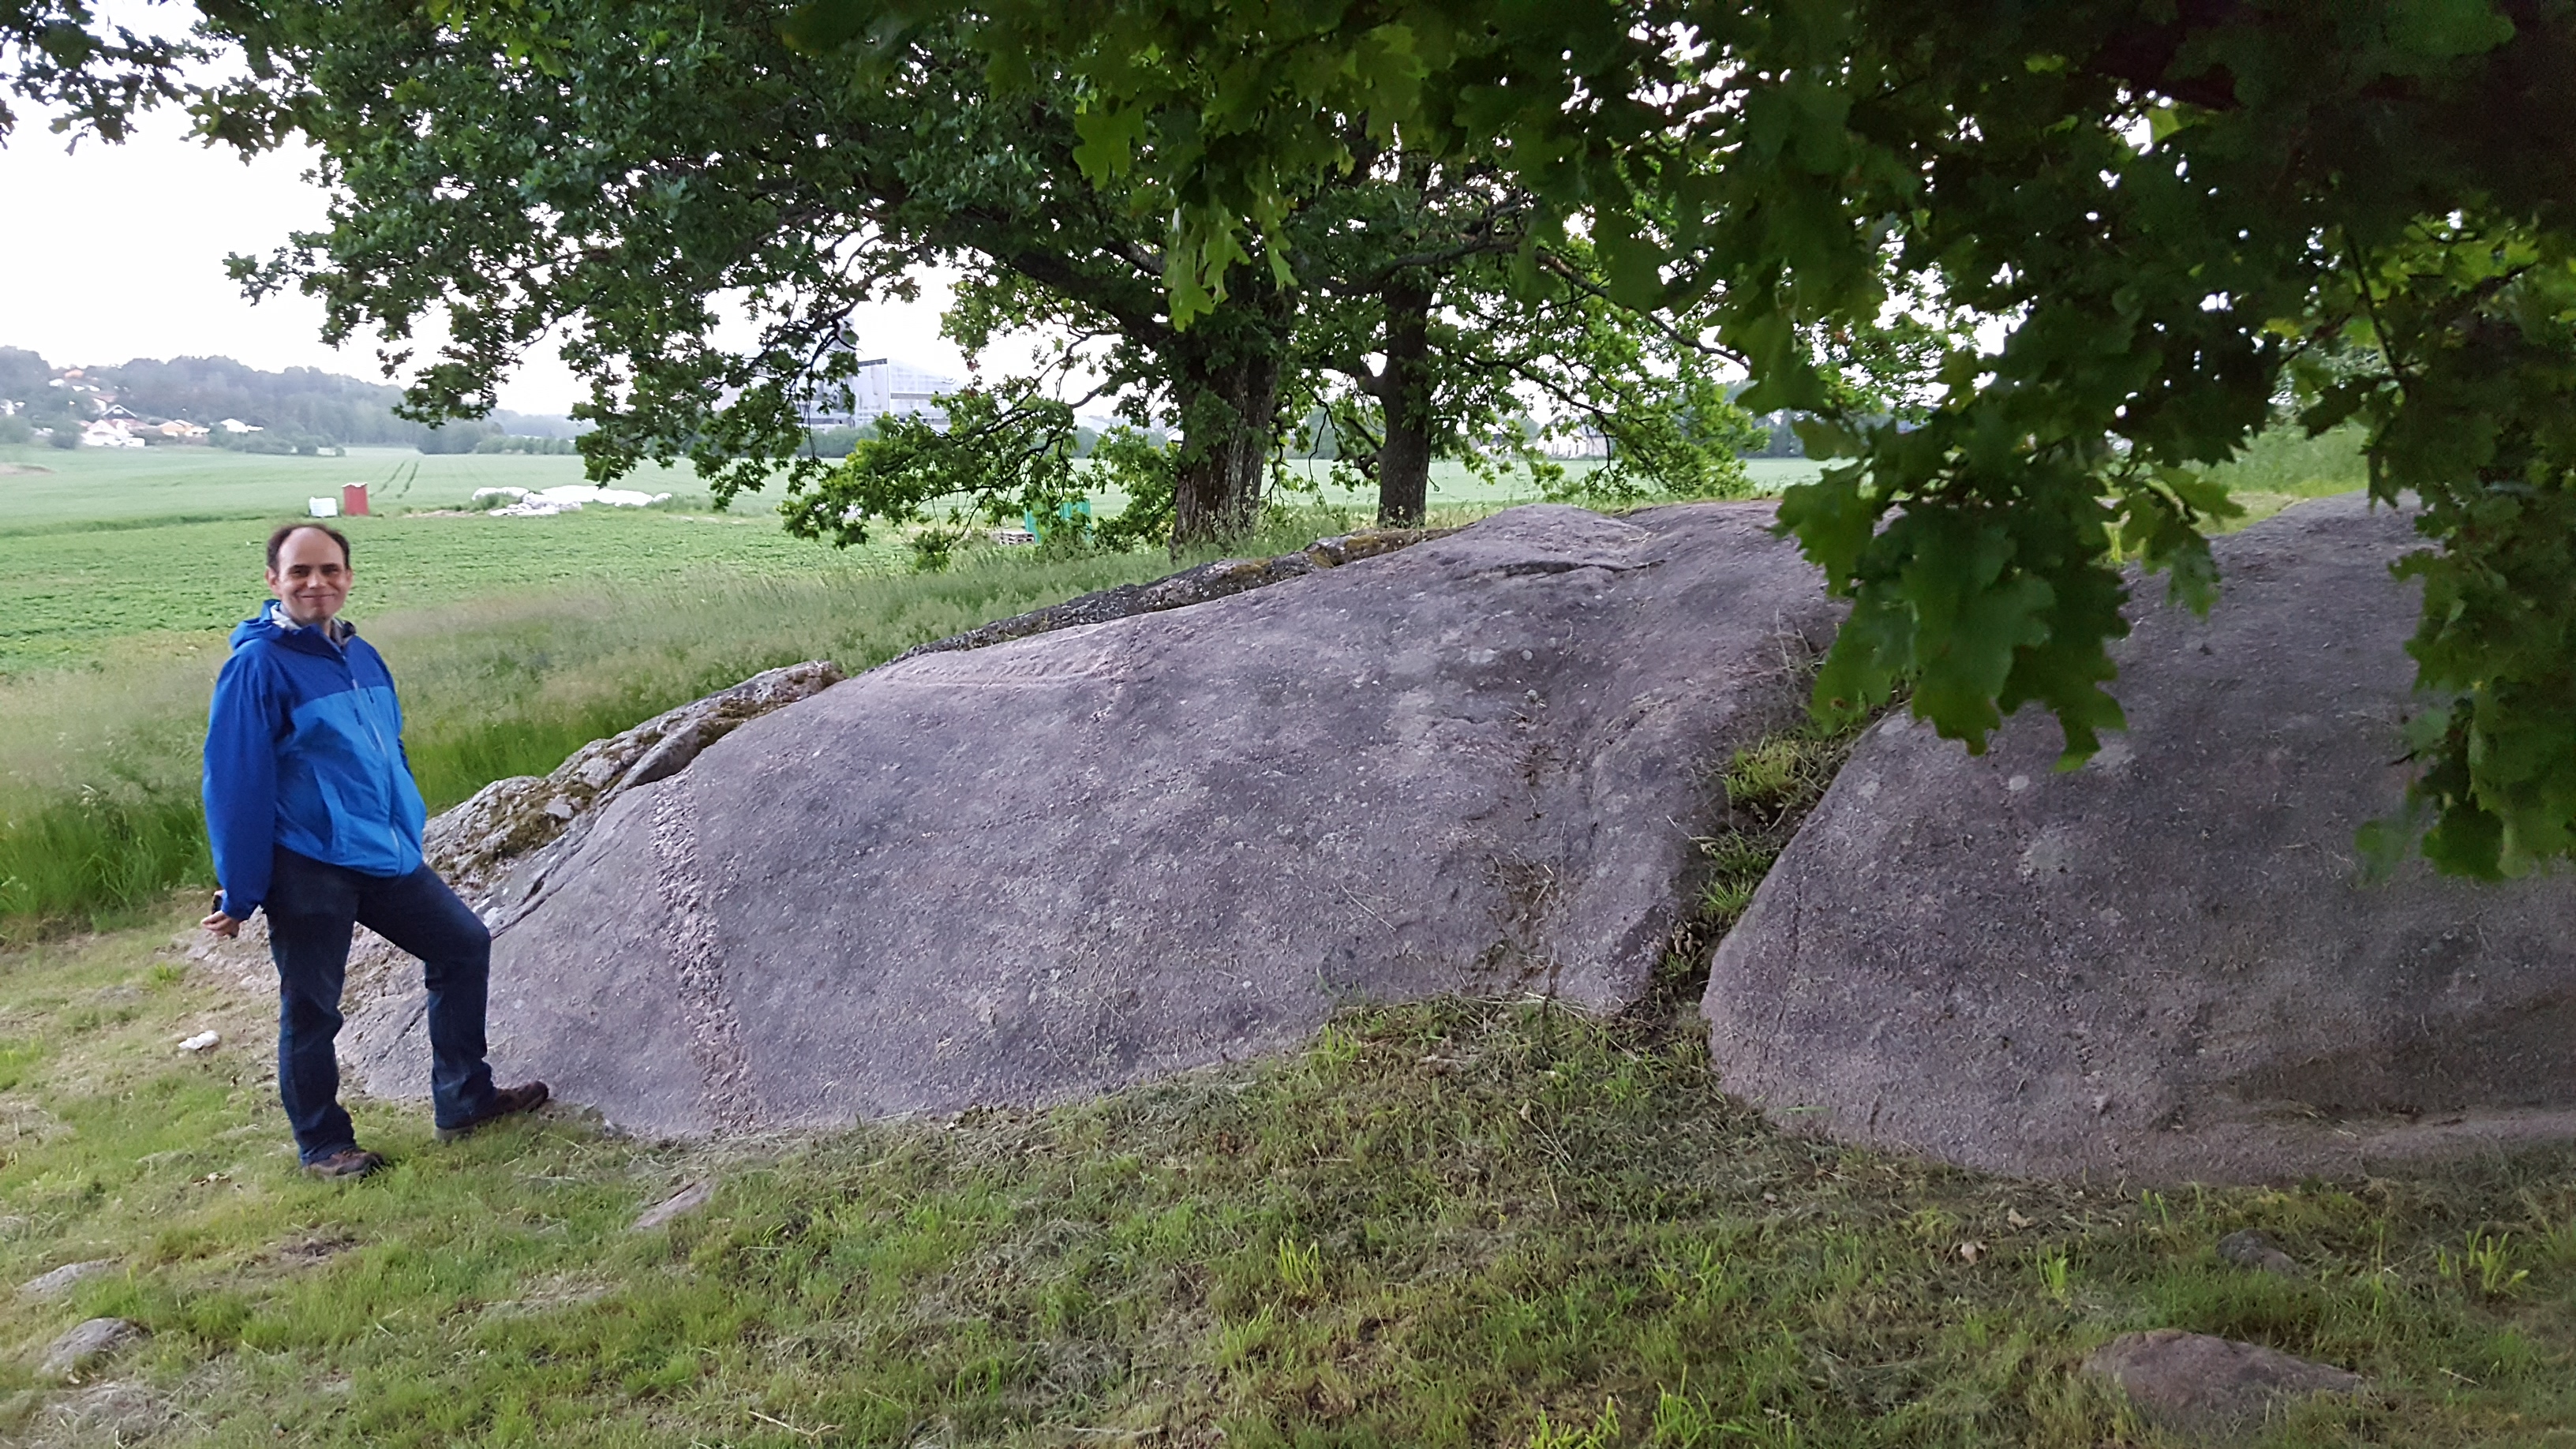 Norway outcrop.”
.